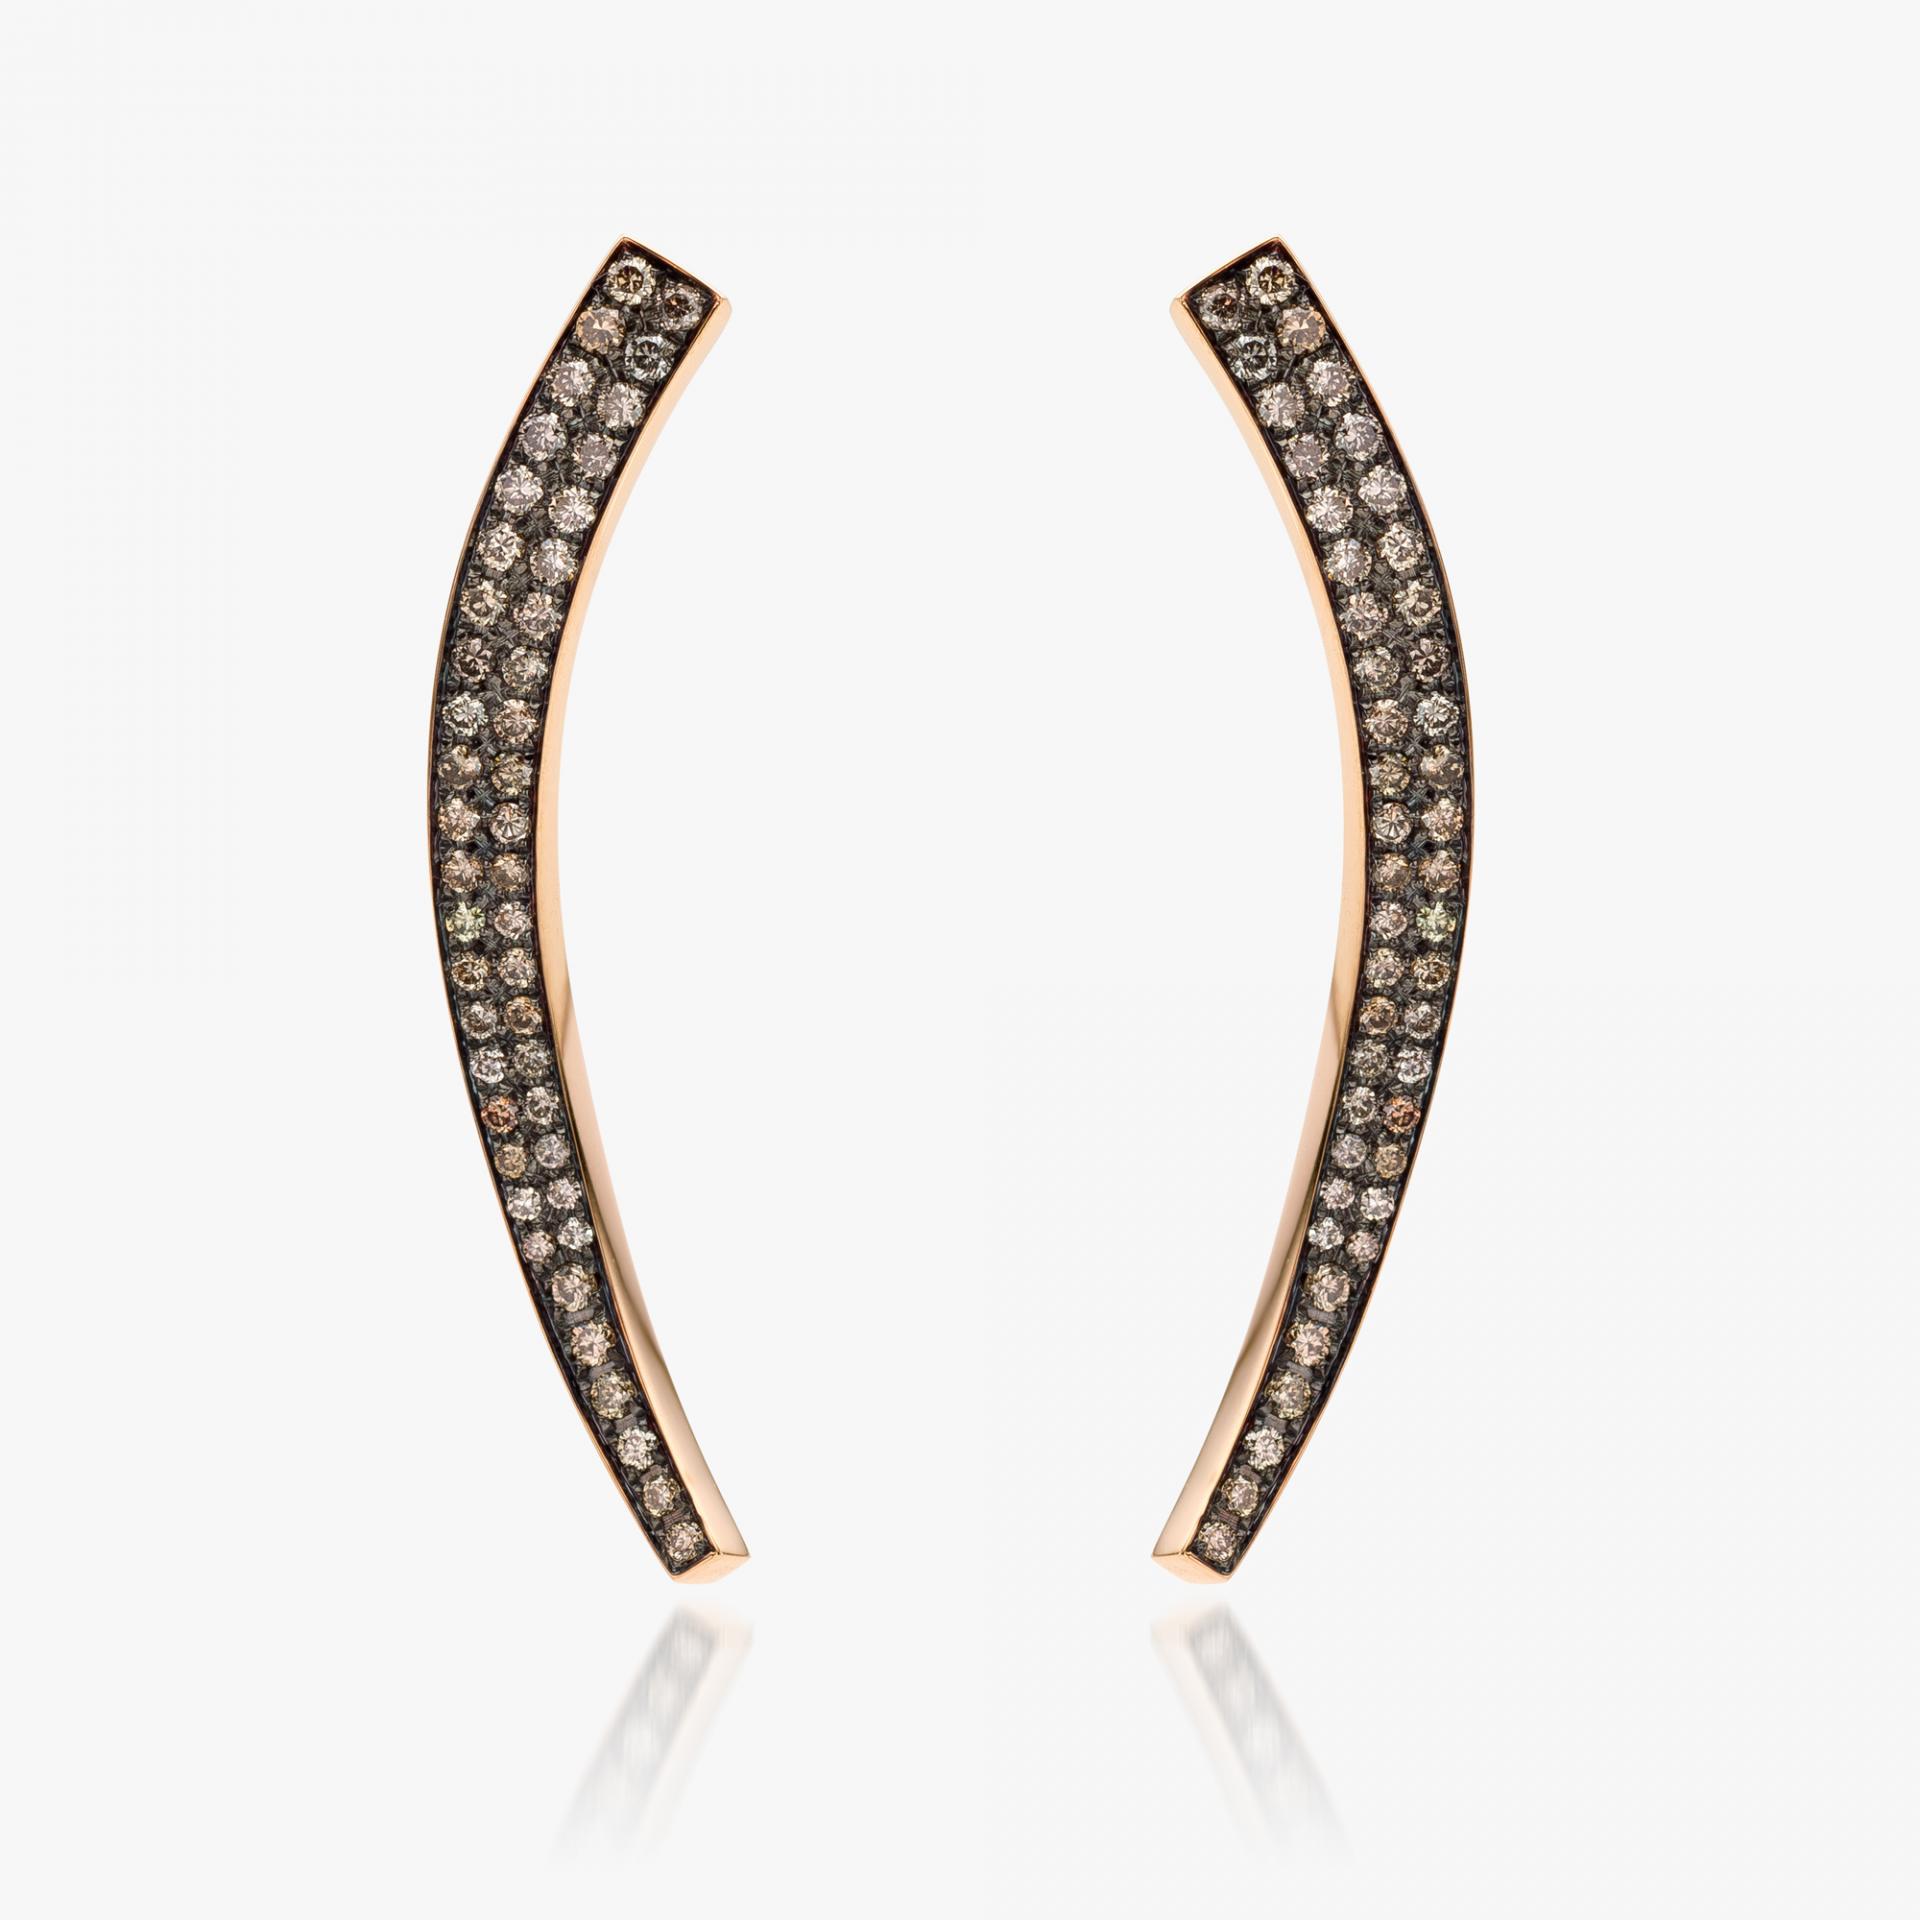 Assymetrical rose gold earrings set with brilliant cut brown diamonds made by Maison De Greef